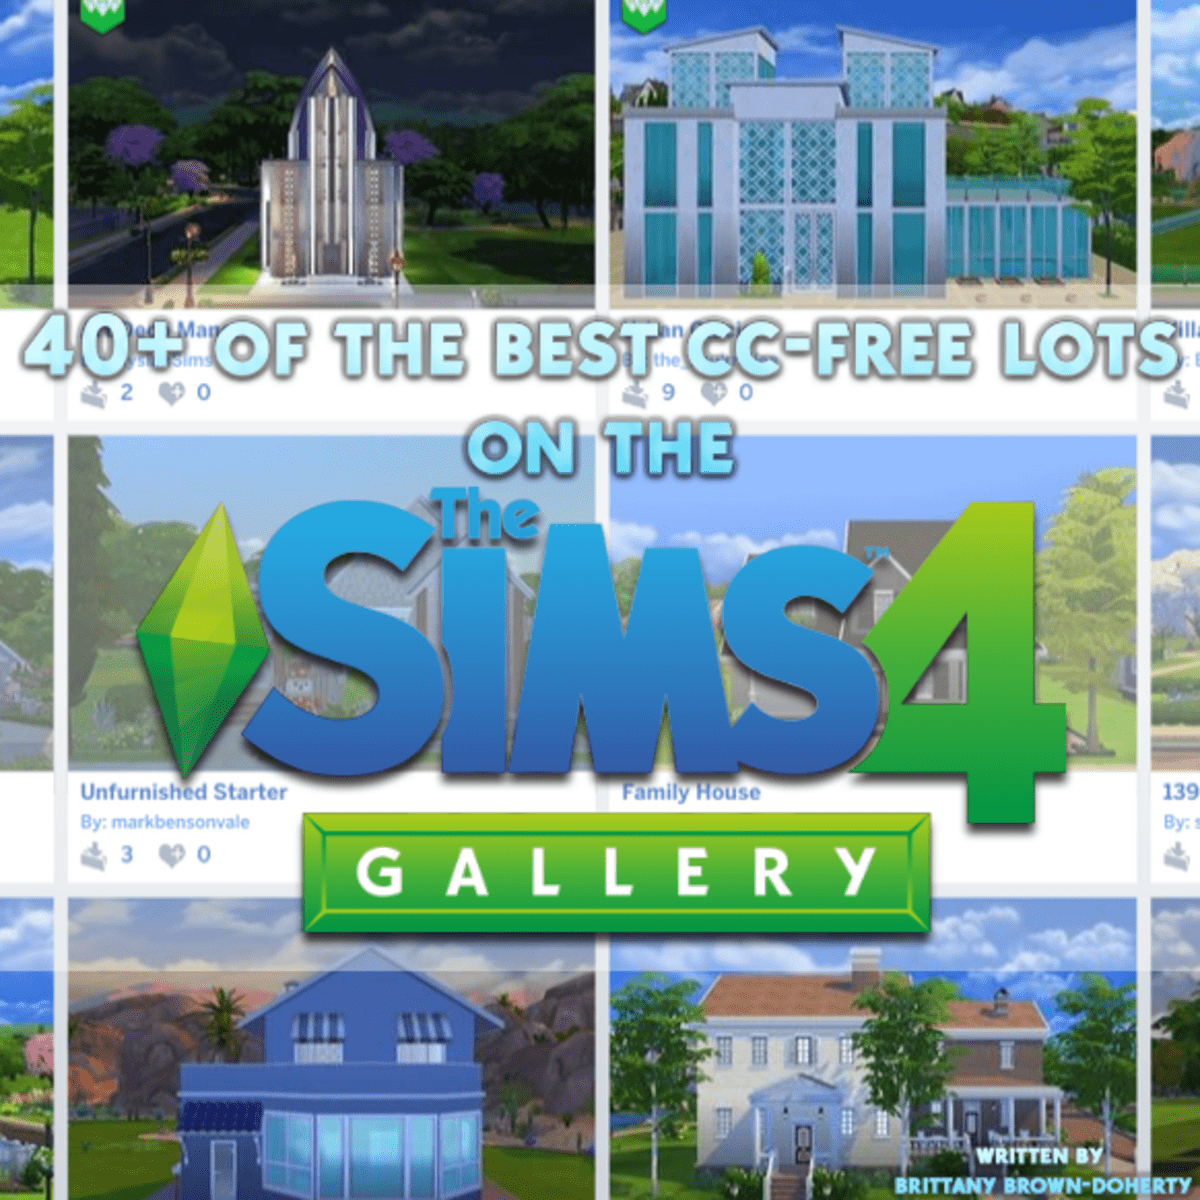 The Sims 4: 10 Spooky Builds From The Gallery That Are Perfect For